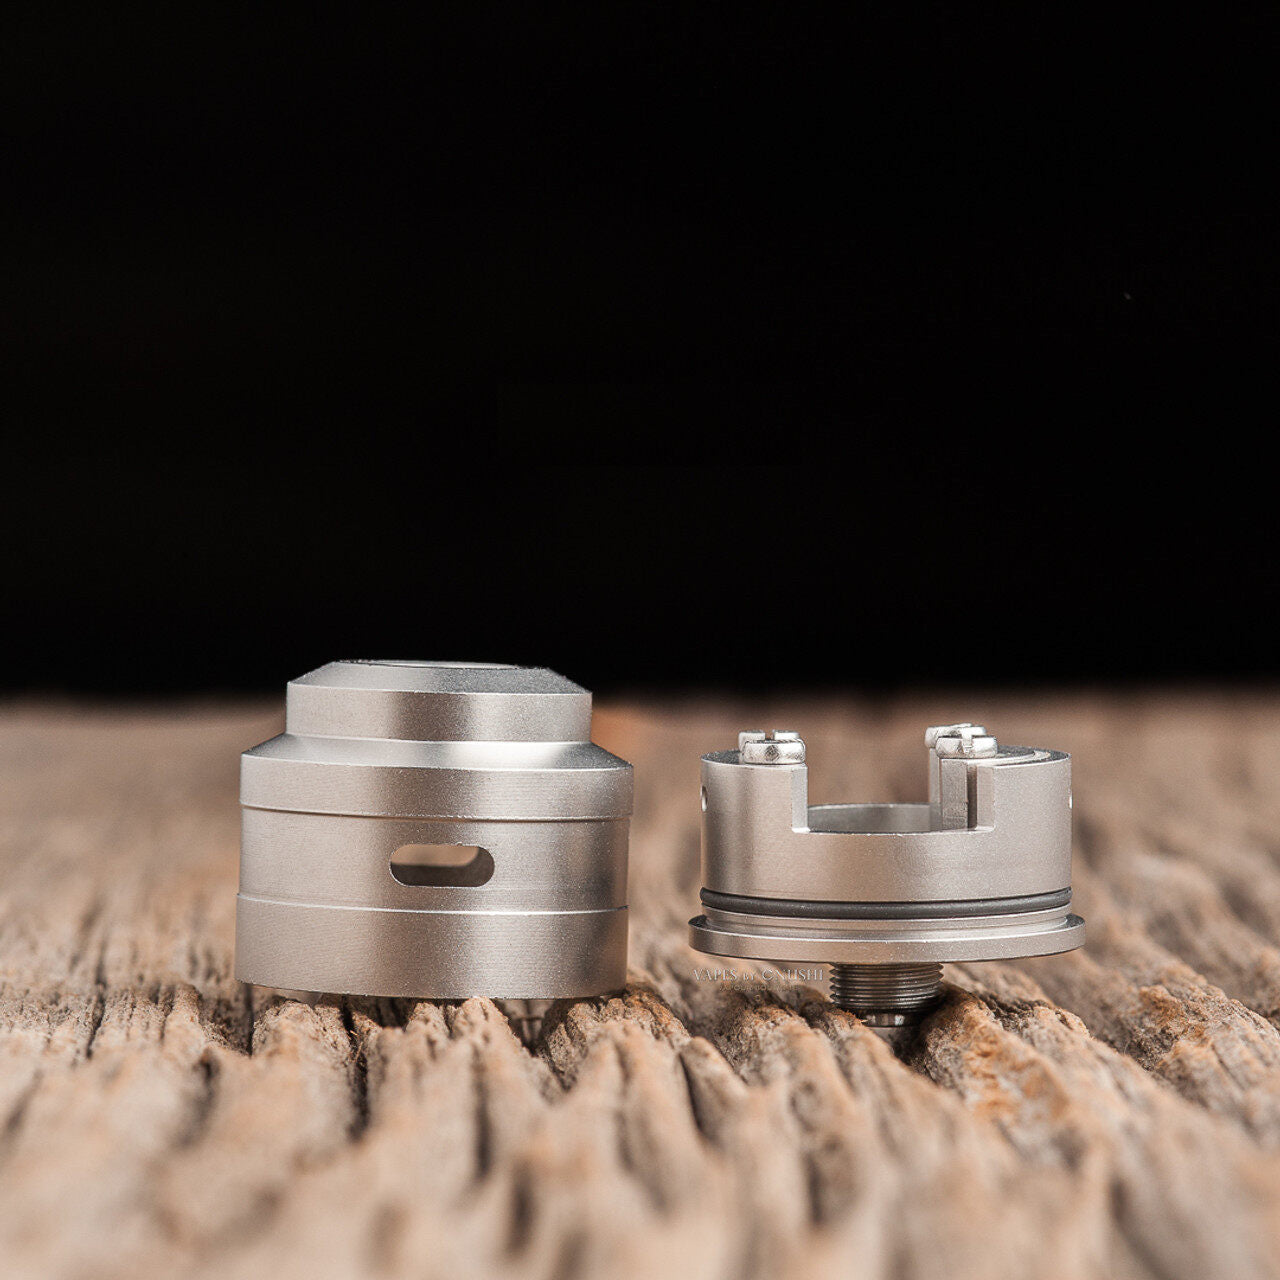 Vapornaute Le Supersonic 22mm RDA (Made in France)